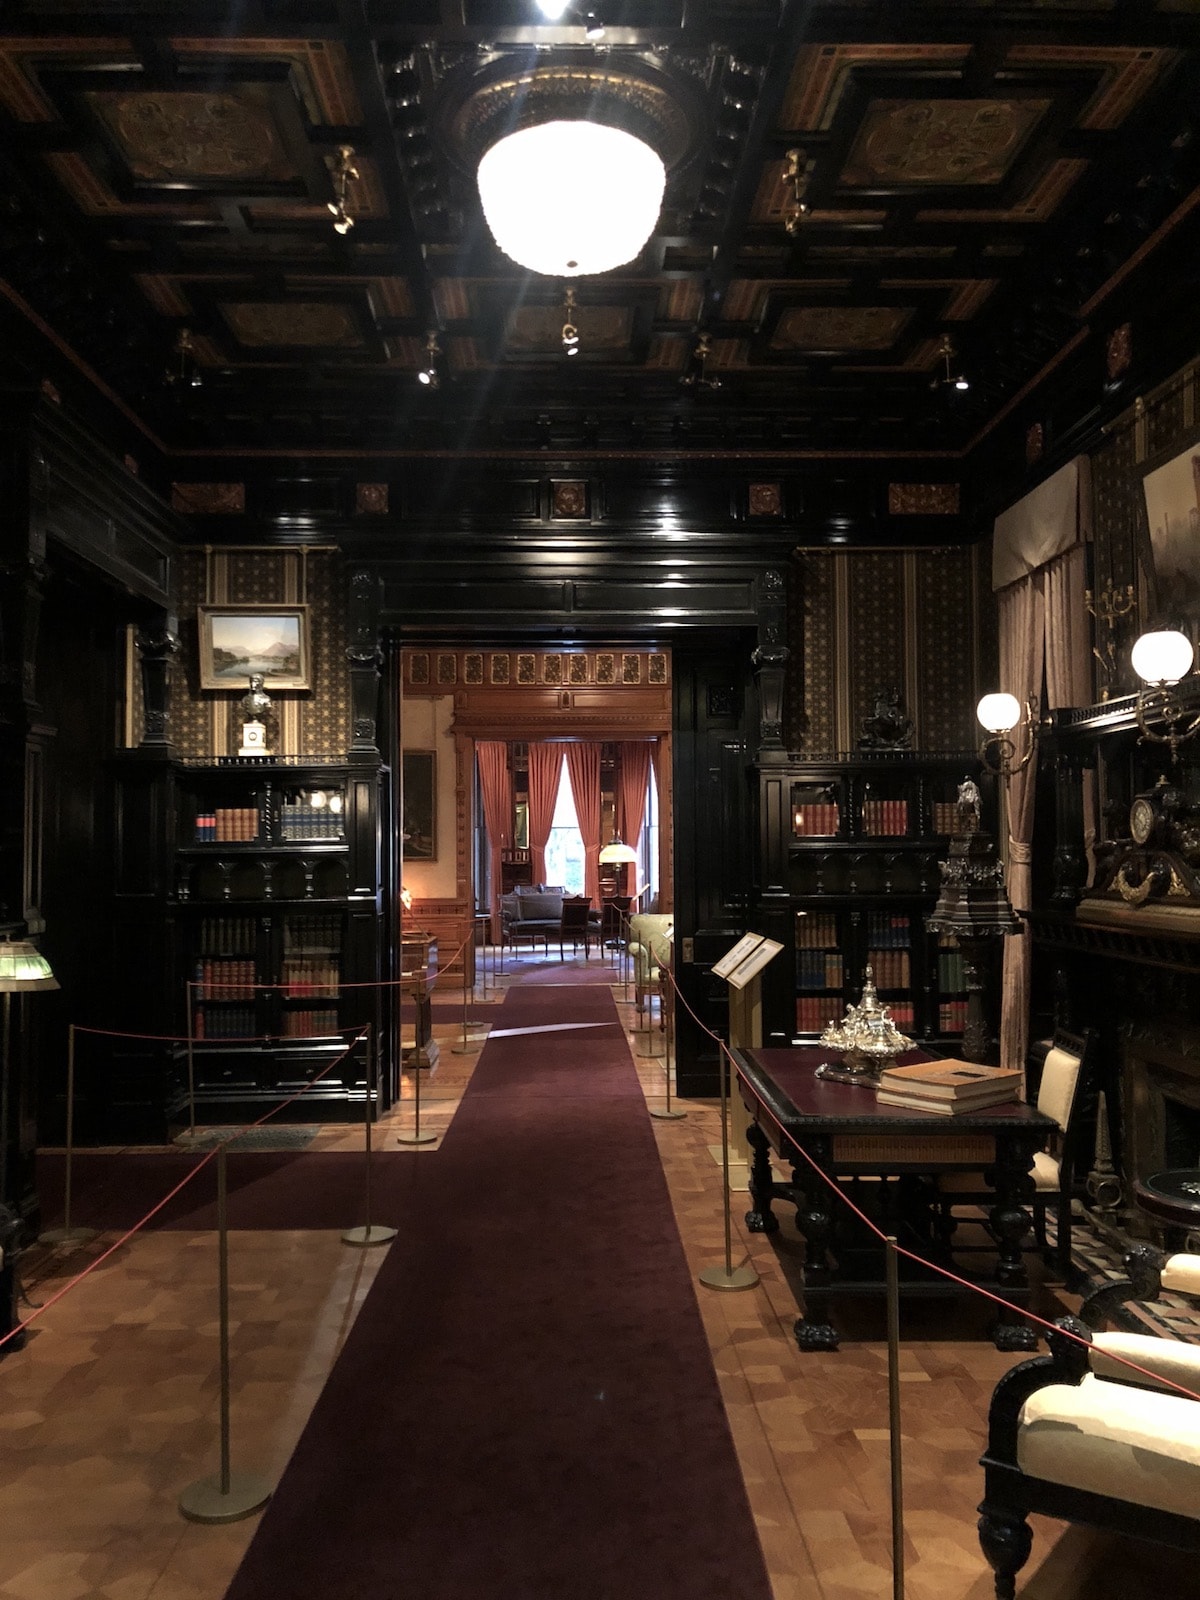 Enjoy Illinois: Exploring Chicago and the Magnificent Mile - Driehaus Museum